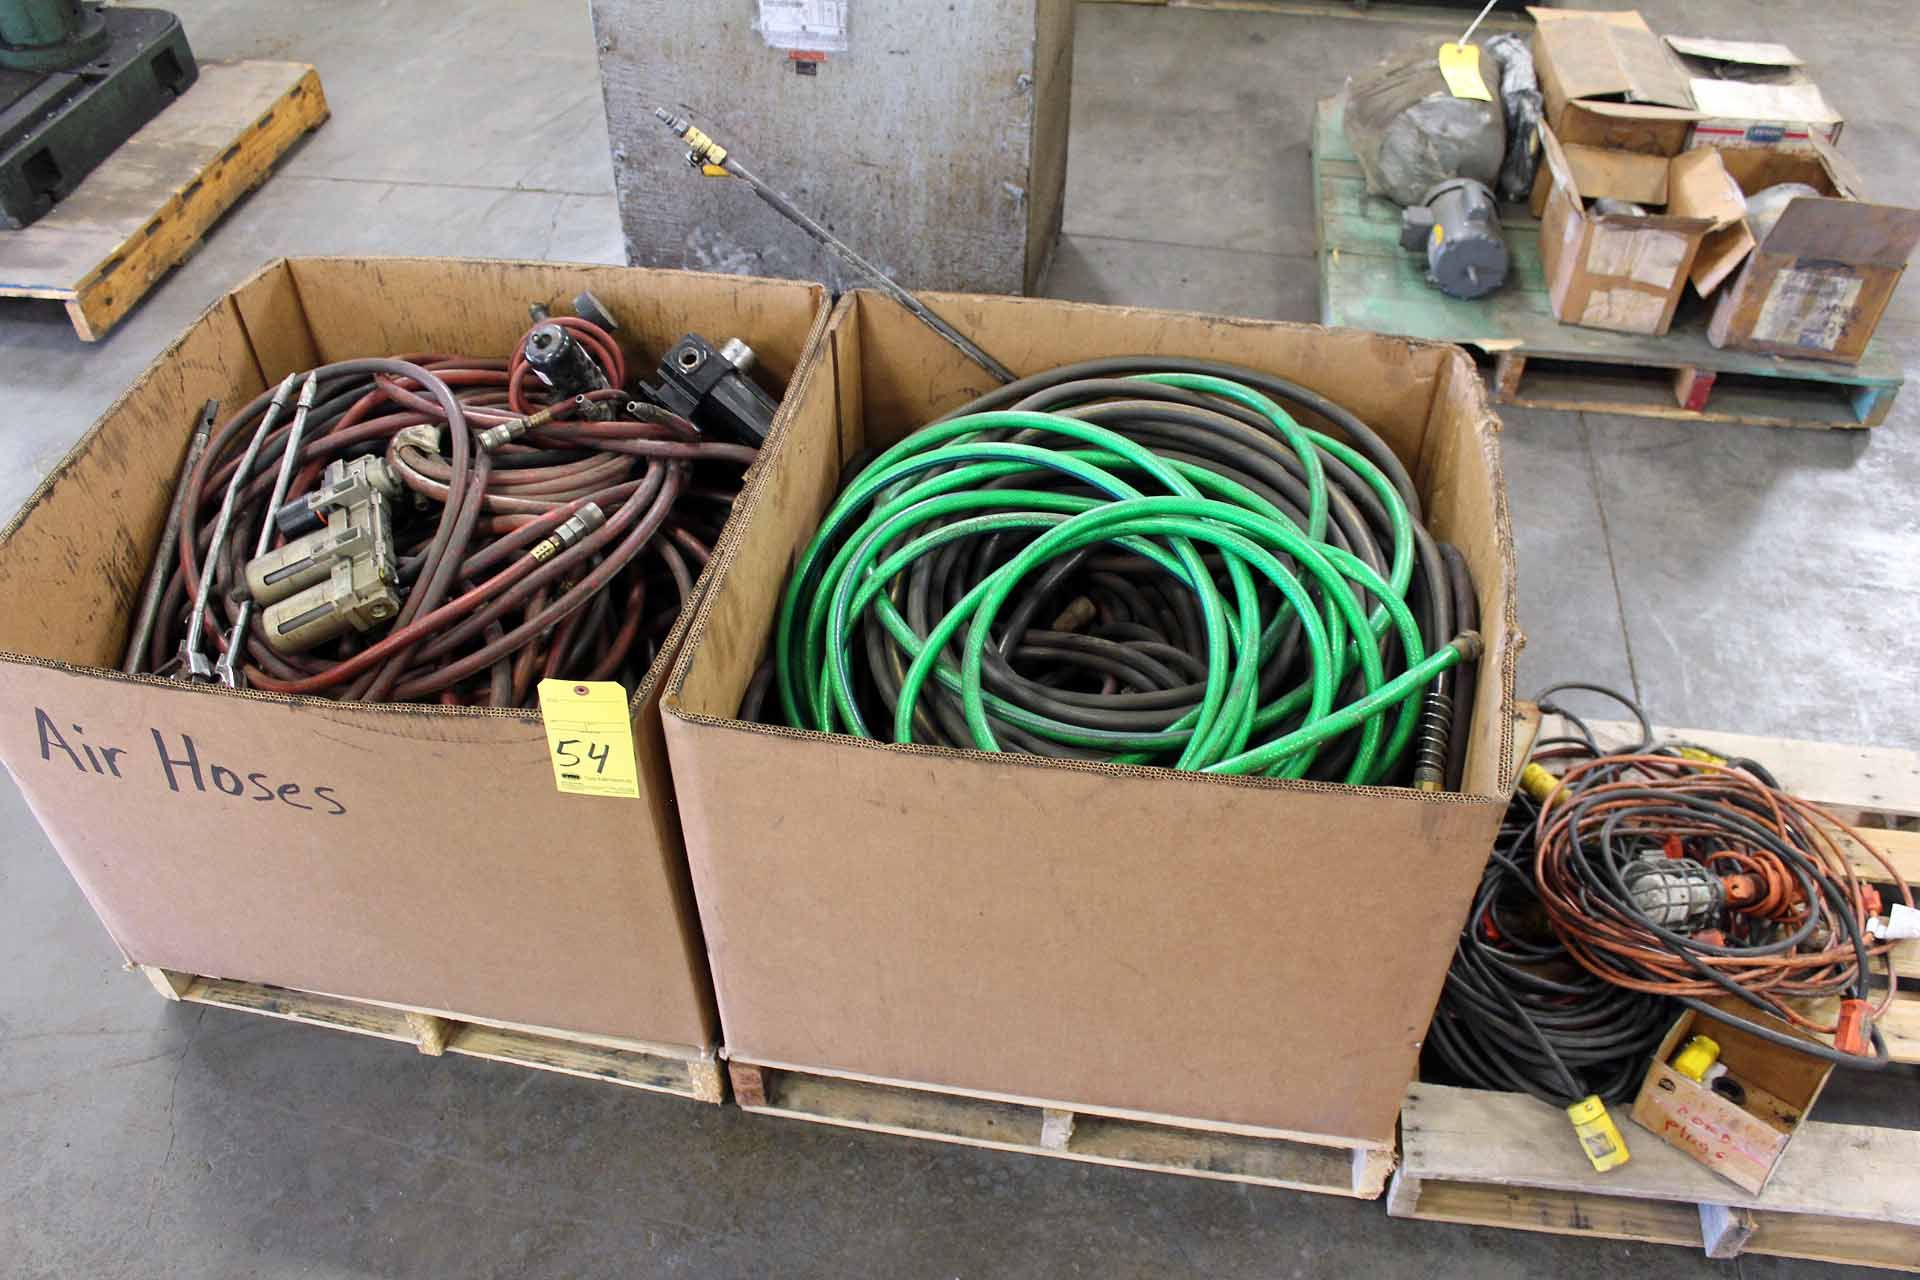 LOT CONSISTING OF: air hose & pwr. cords